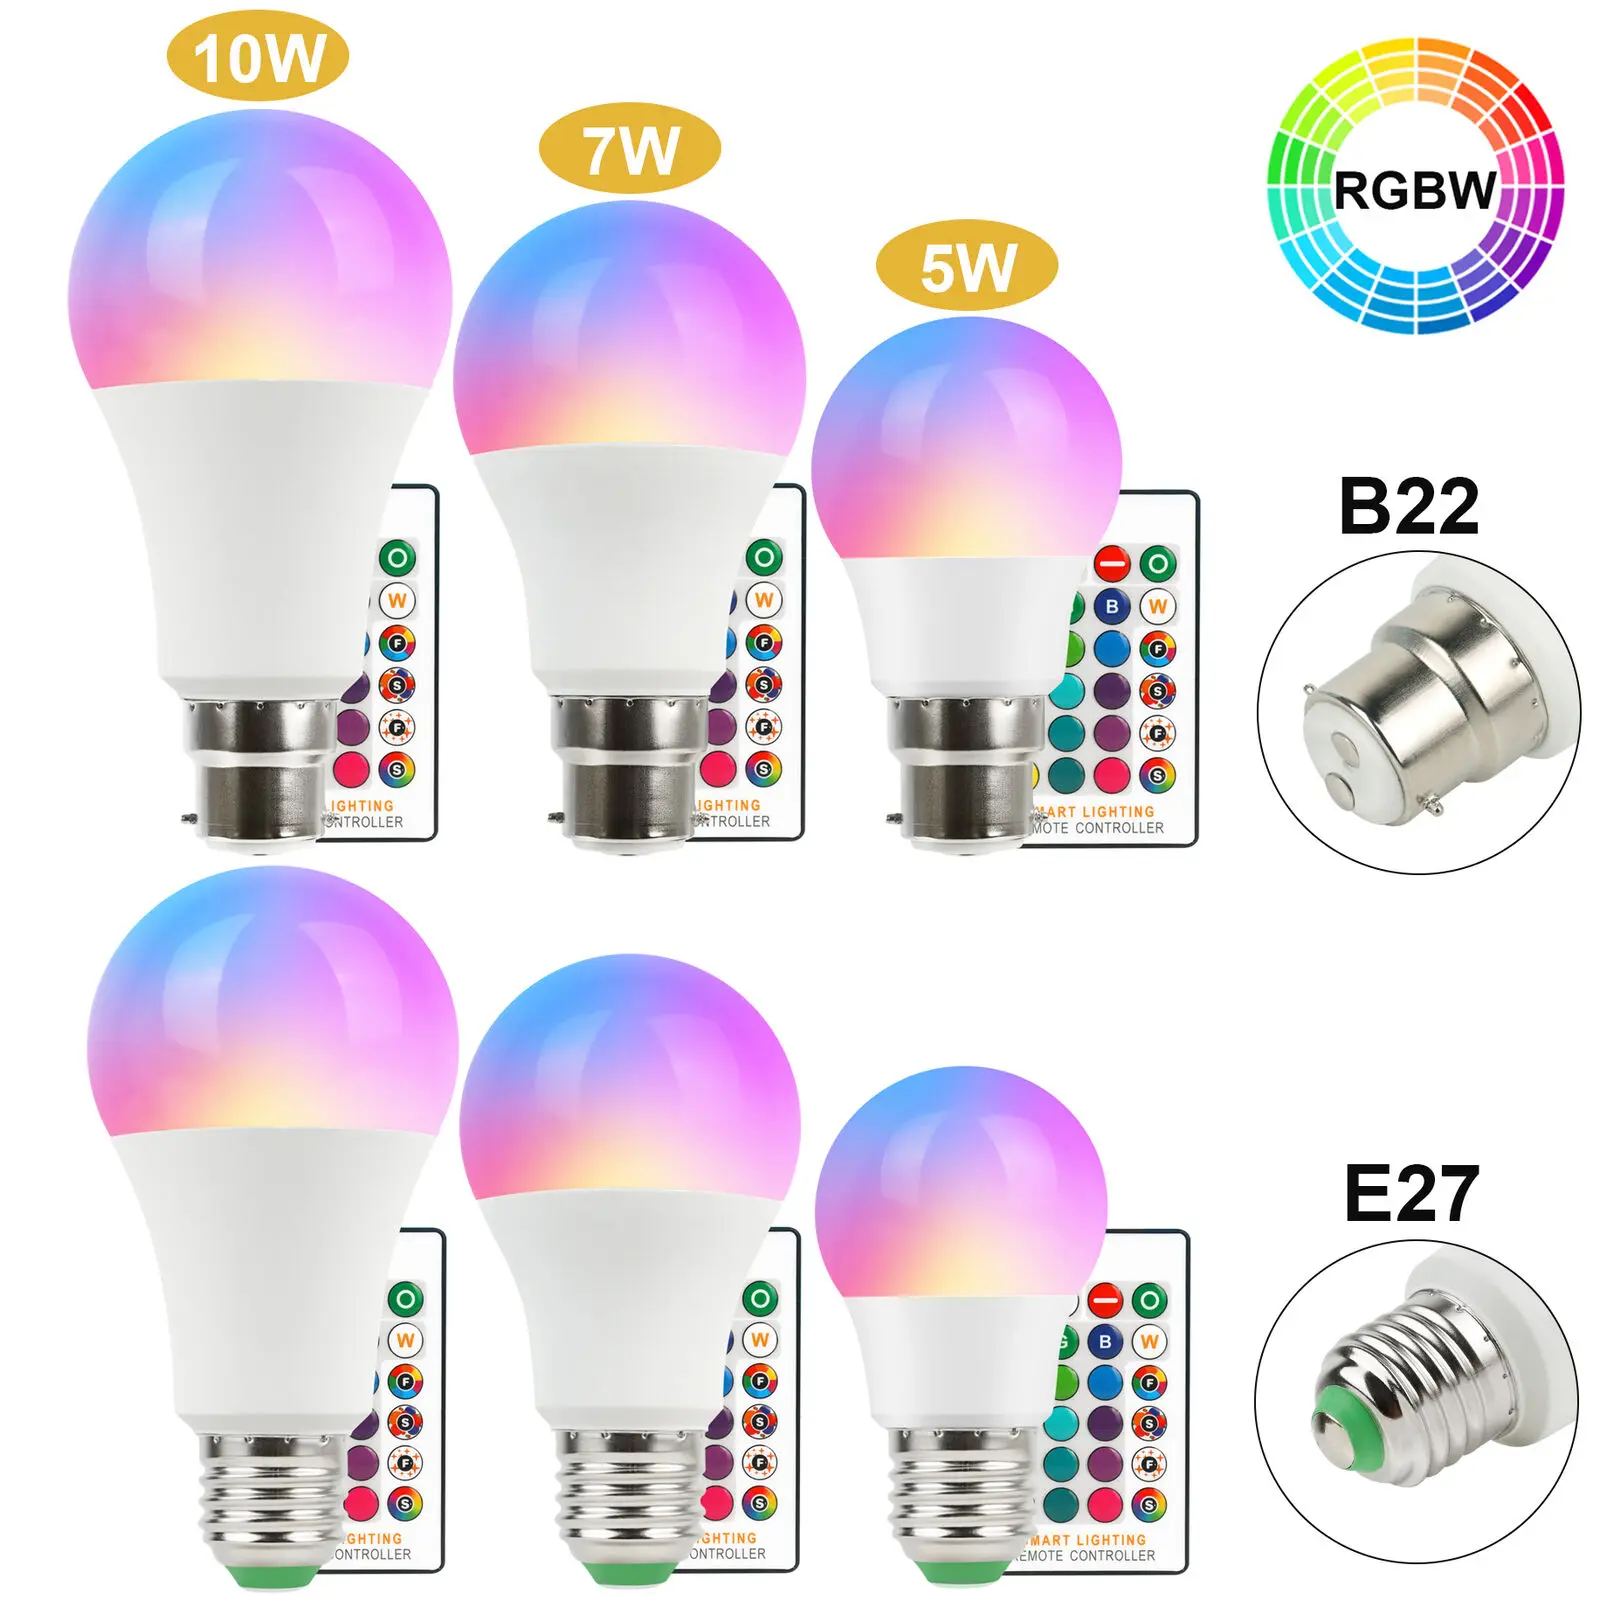 RGB Bulb Led Light B22 E27 5W 10W 15W Dimmable 16 Color Changing Lampada Bayonet Screw Lamp With + IR Remote Control+Memory Mode